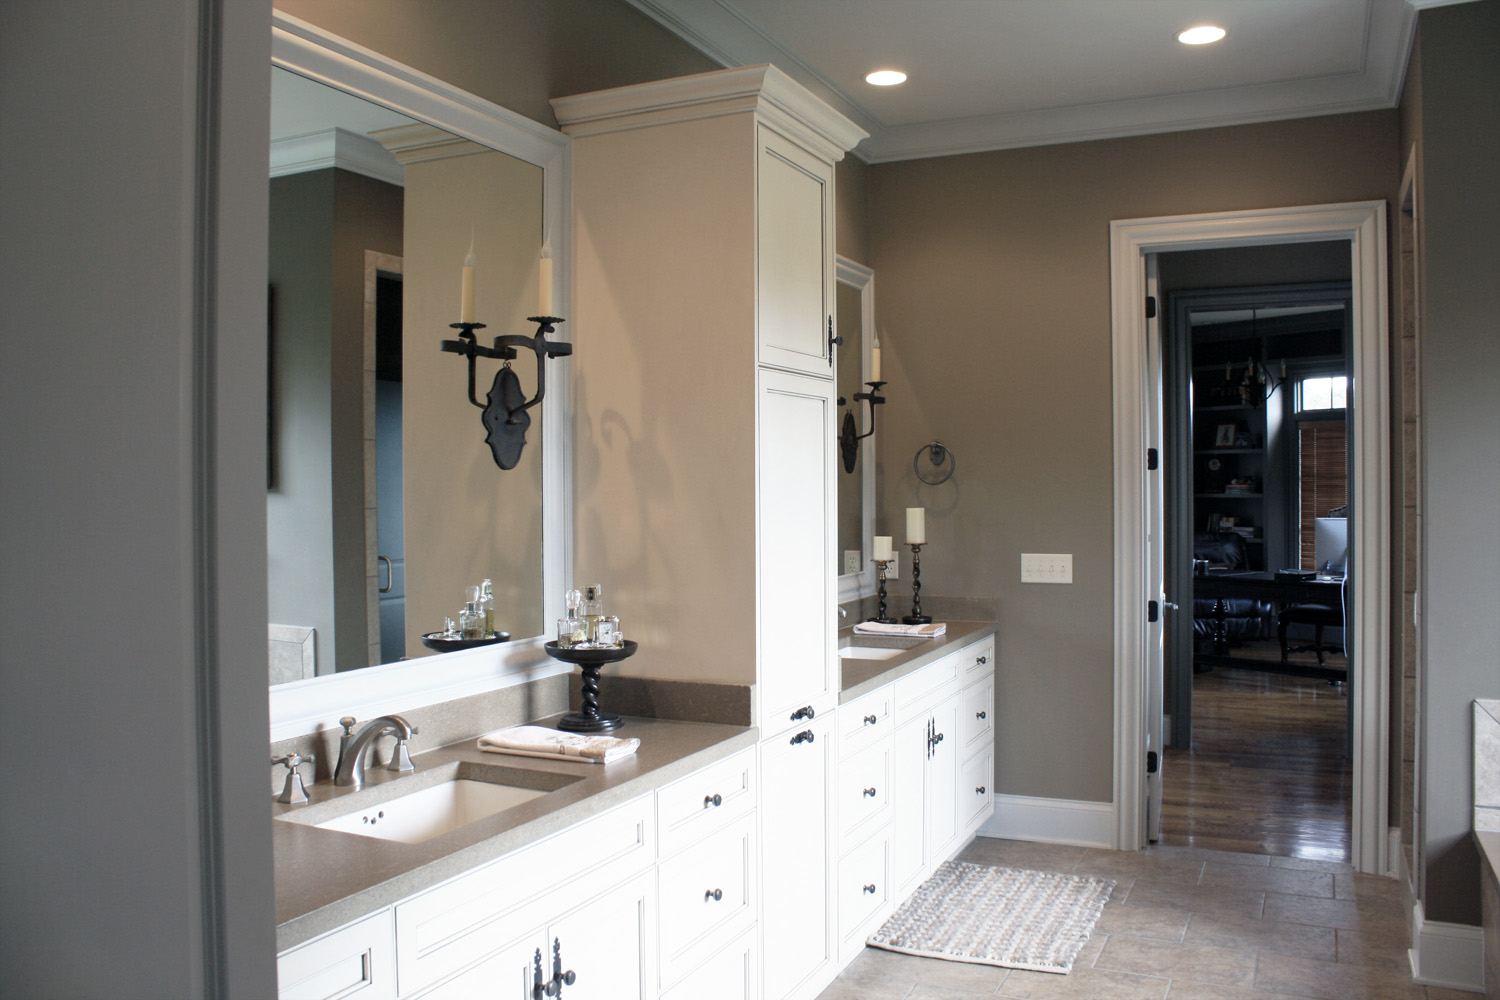 Master bathroom with custom color palate and painted professionally by faux decor